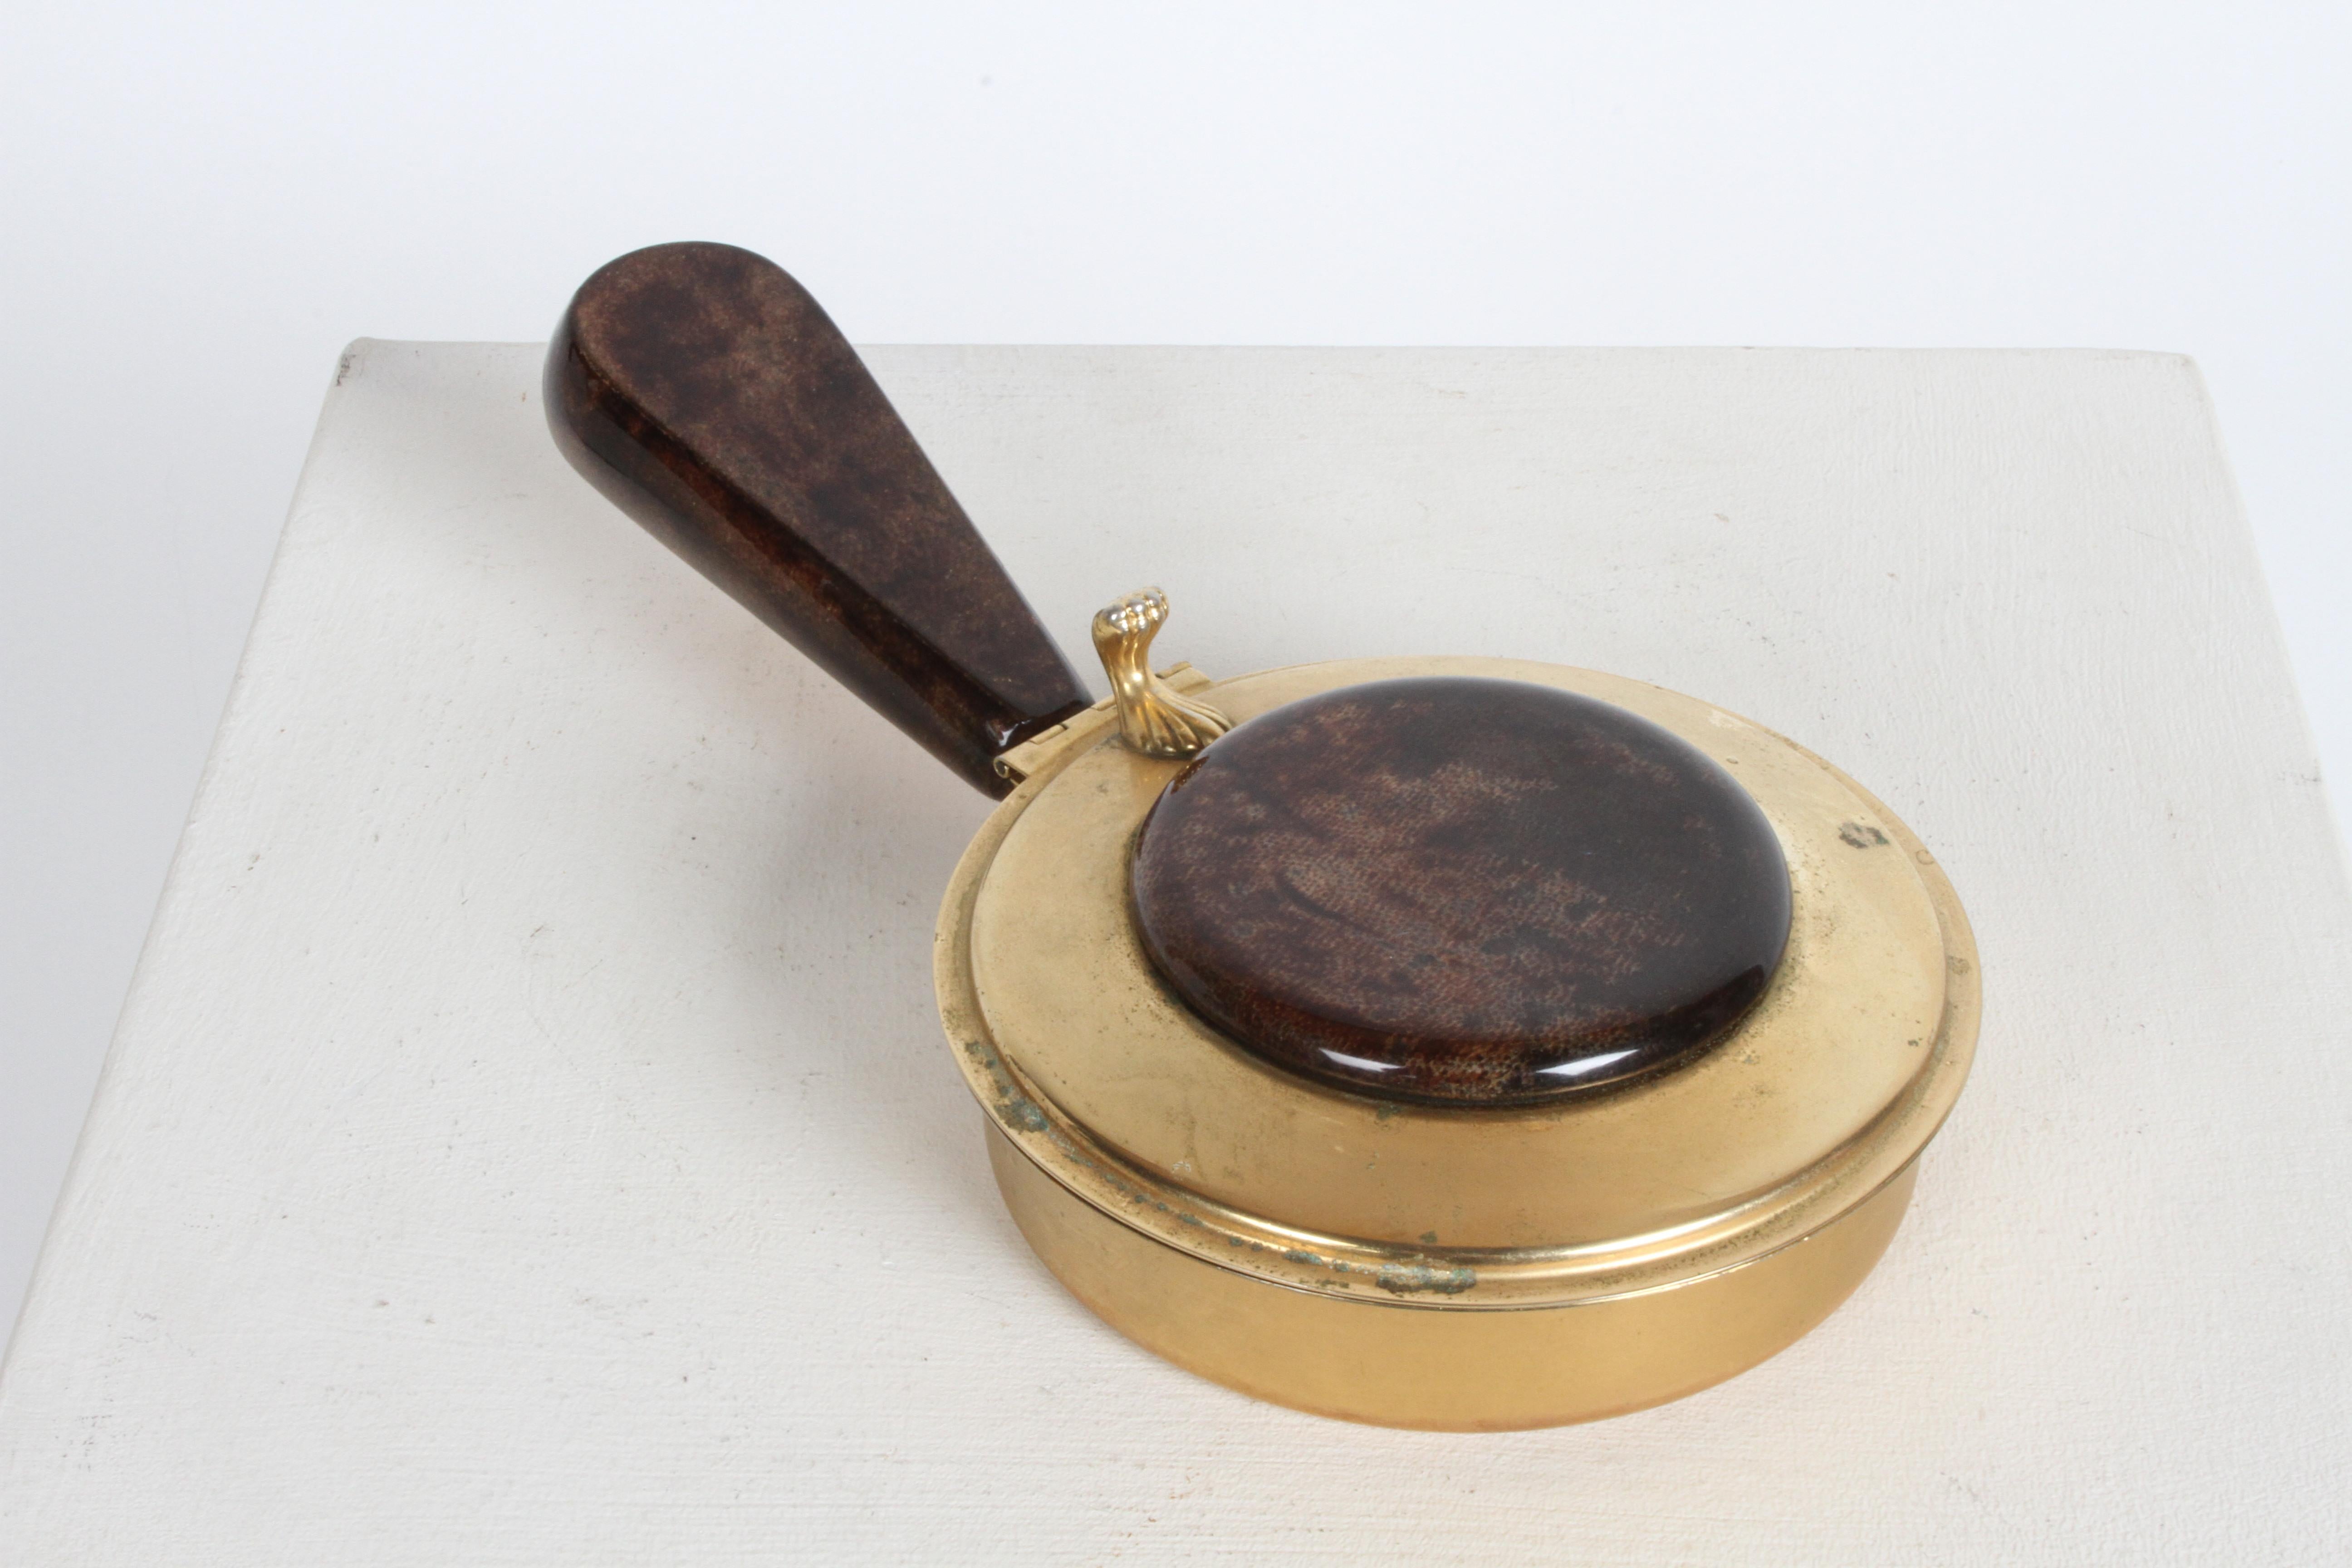 Mid-Century Aldo Tura Italy silent butler or crumb catcher in 24k goldt plate with lacquered goatskin parchment. Hard to find silent butler, classic Tura's style with the lacquered goatskin lid top and chunky handle. Wear / patina to 24k gold plate,